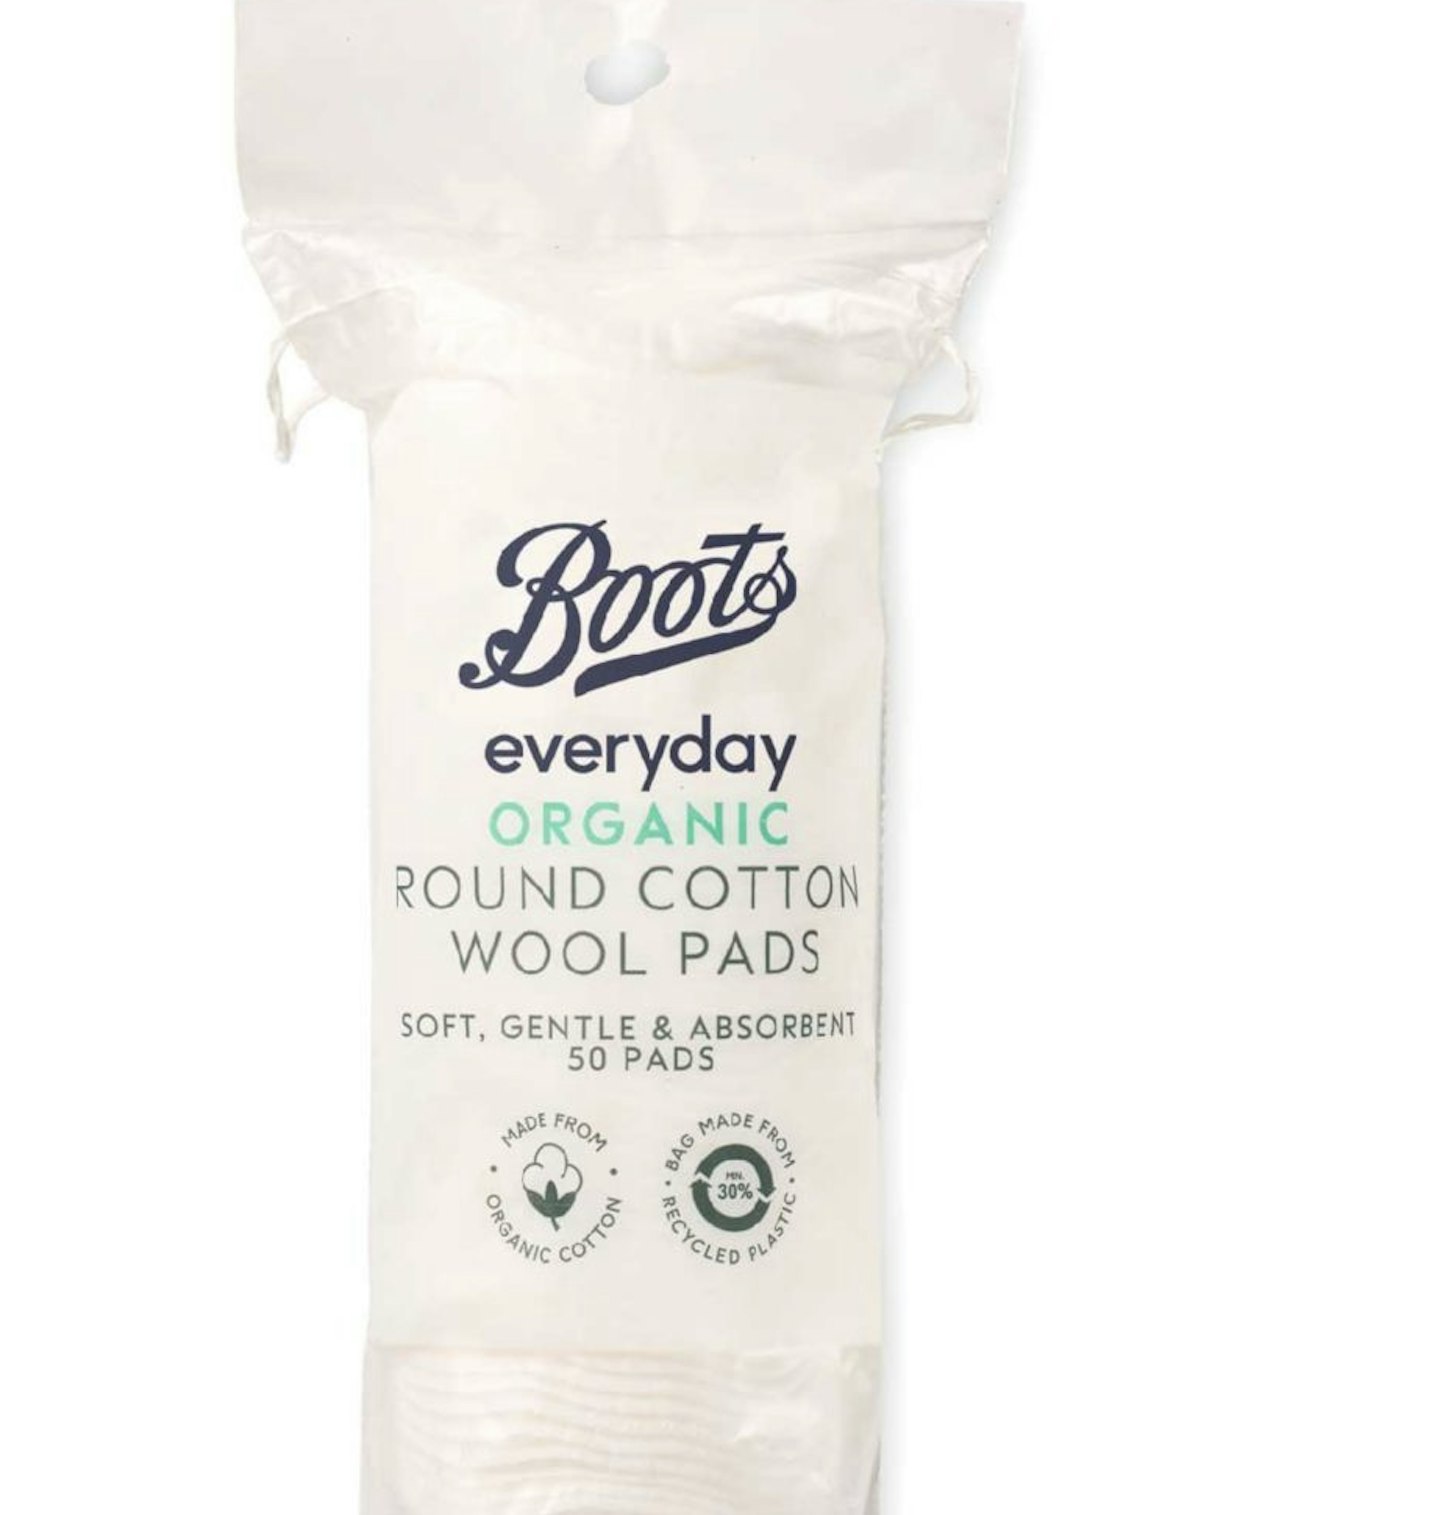  offer Boots Everyday Organic Round Cotton Wool Pads 50 pads